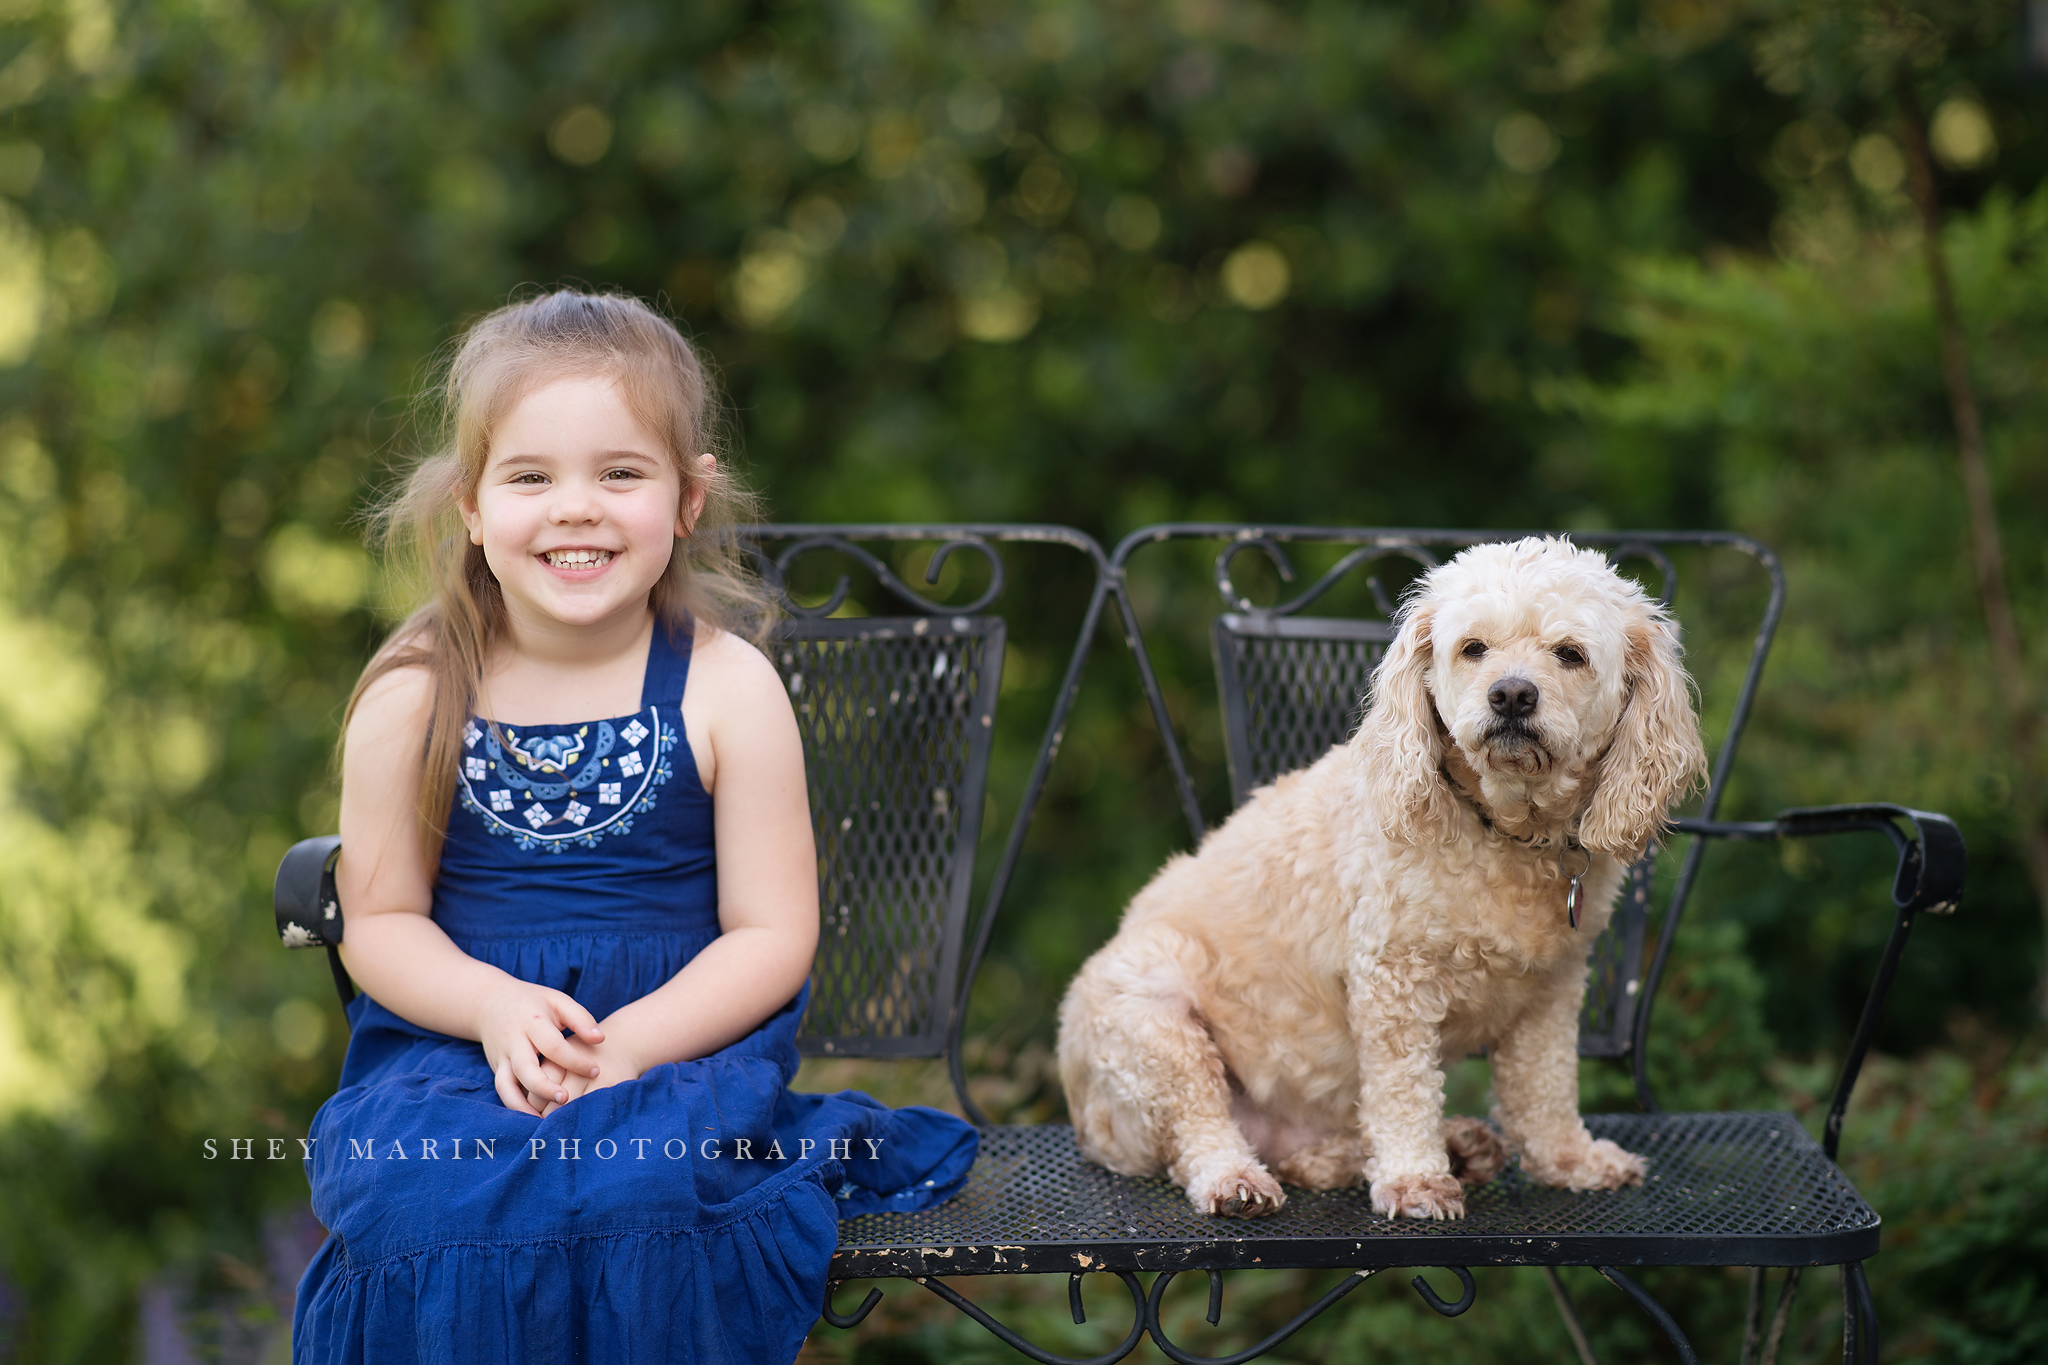 Maryland child and family photographer